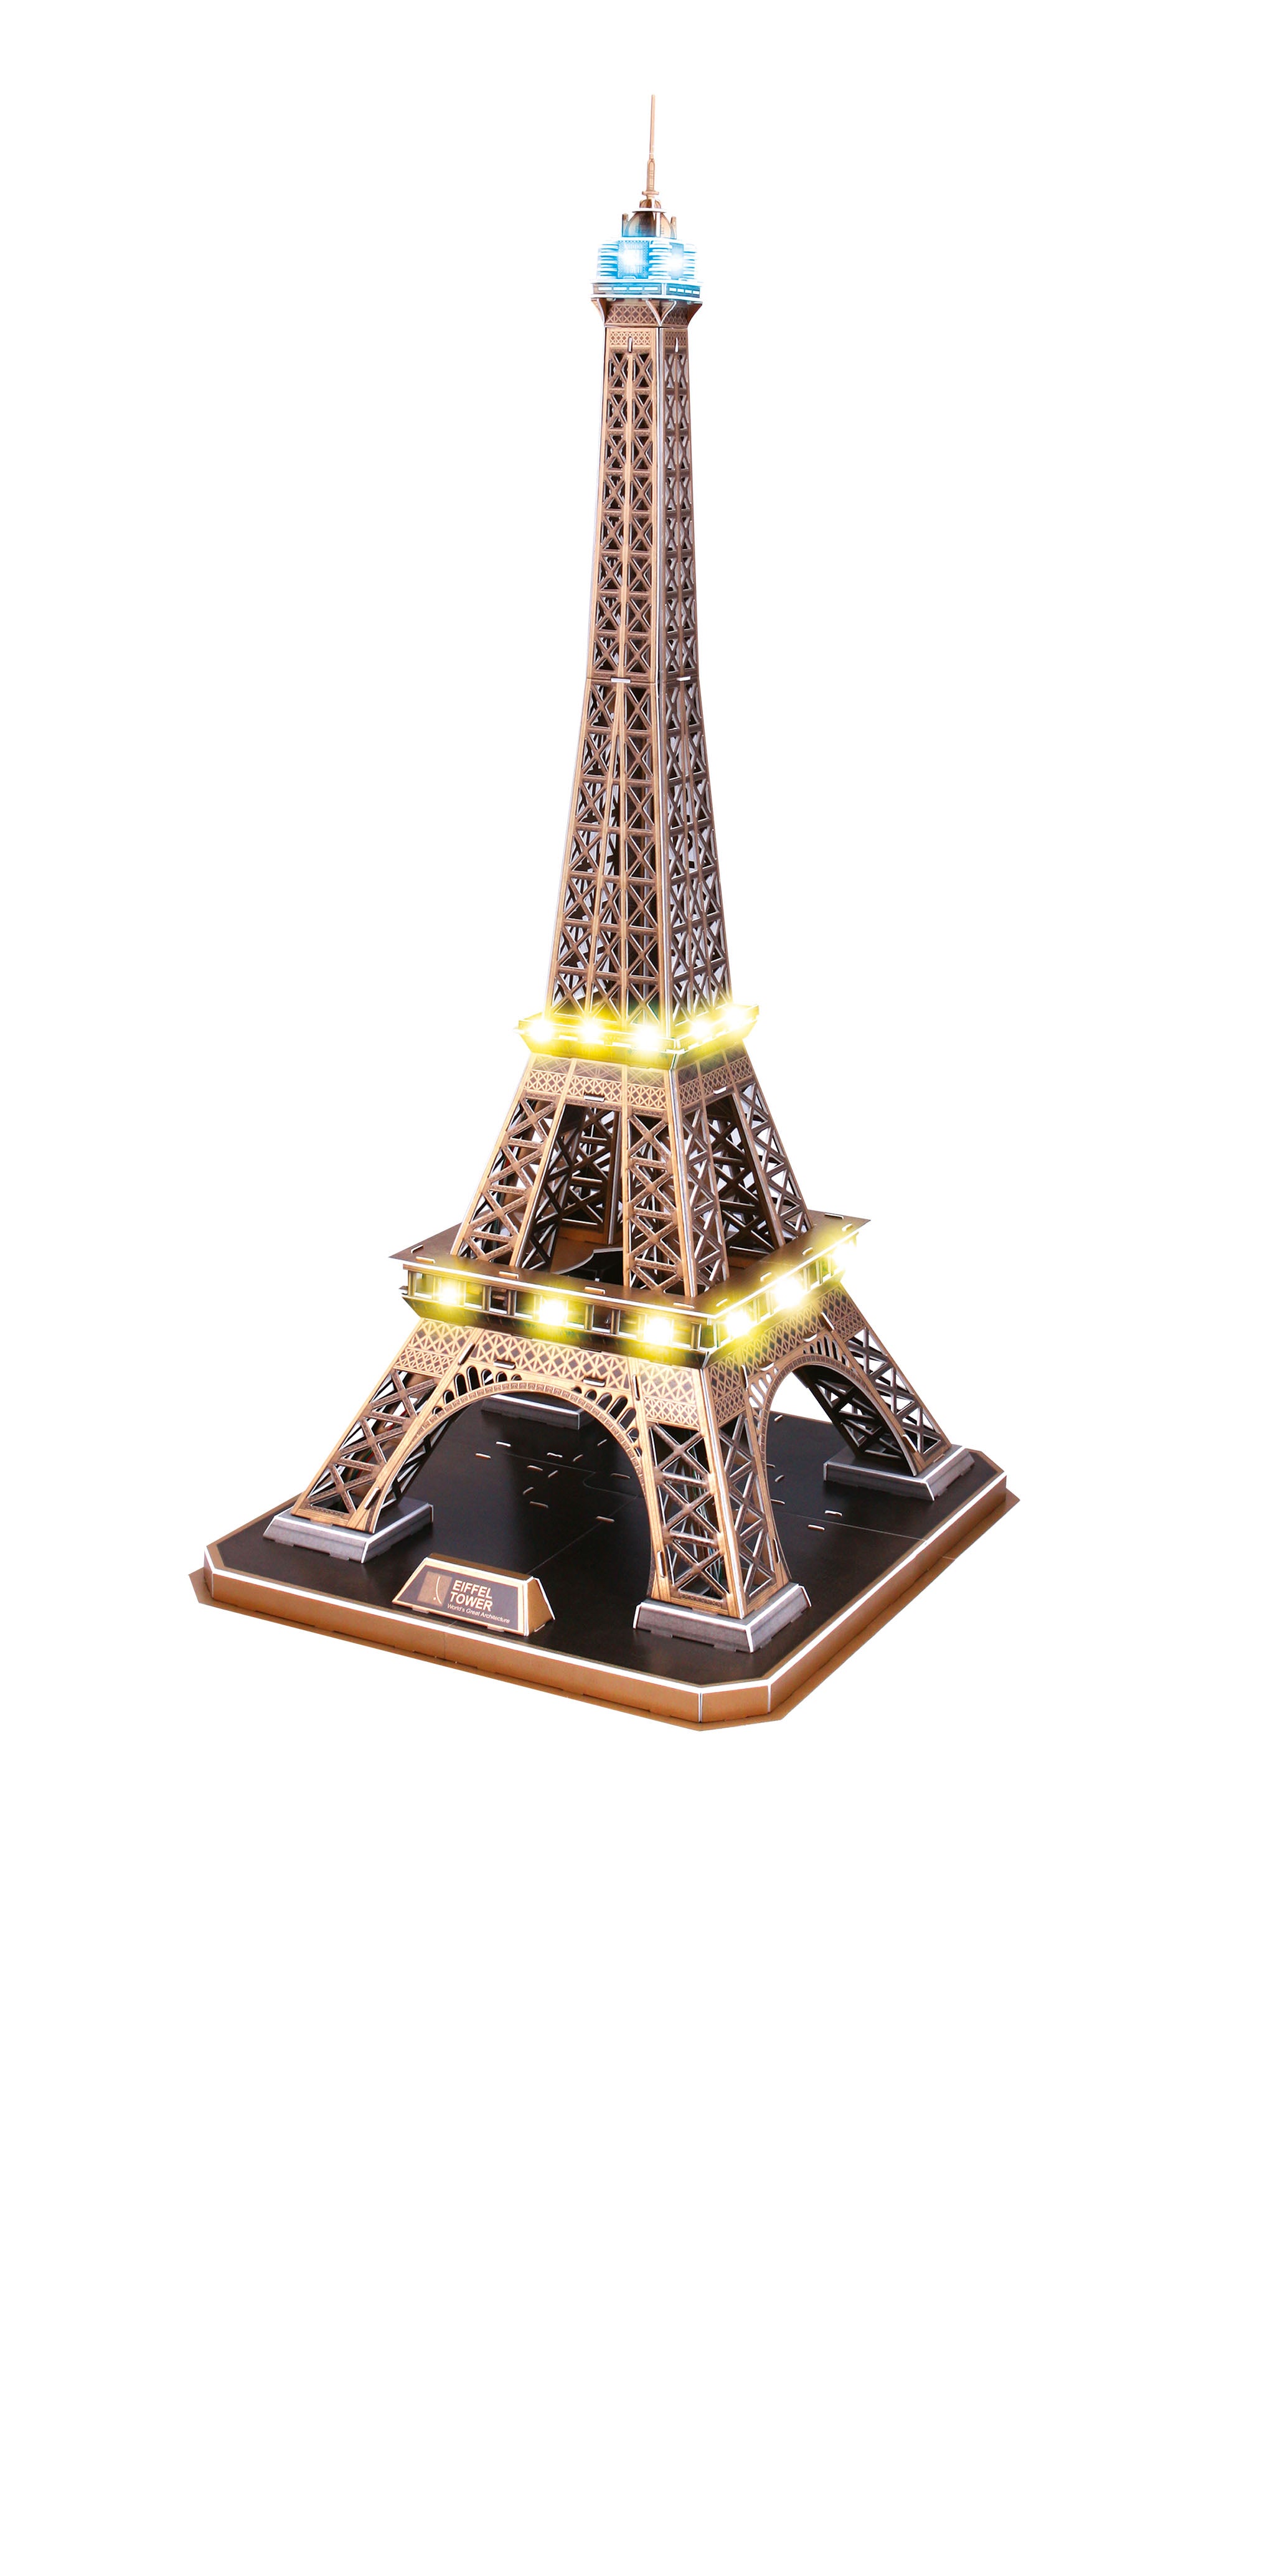 3D Puzzle Revell Eiffel Tower - LED Edition Alternate 1